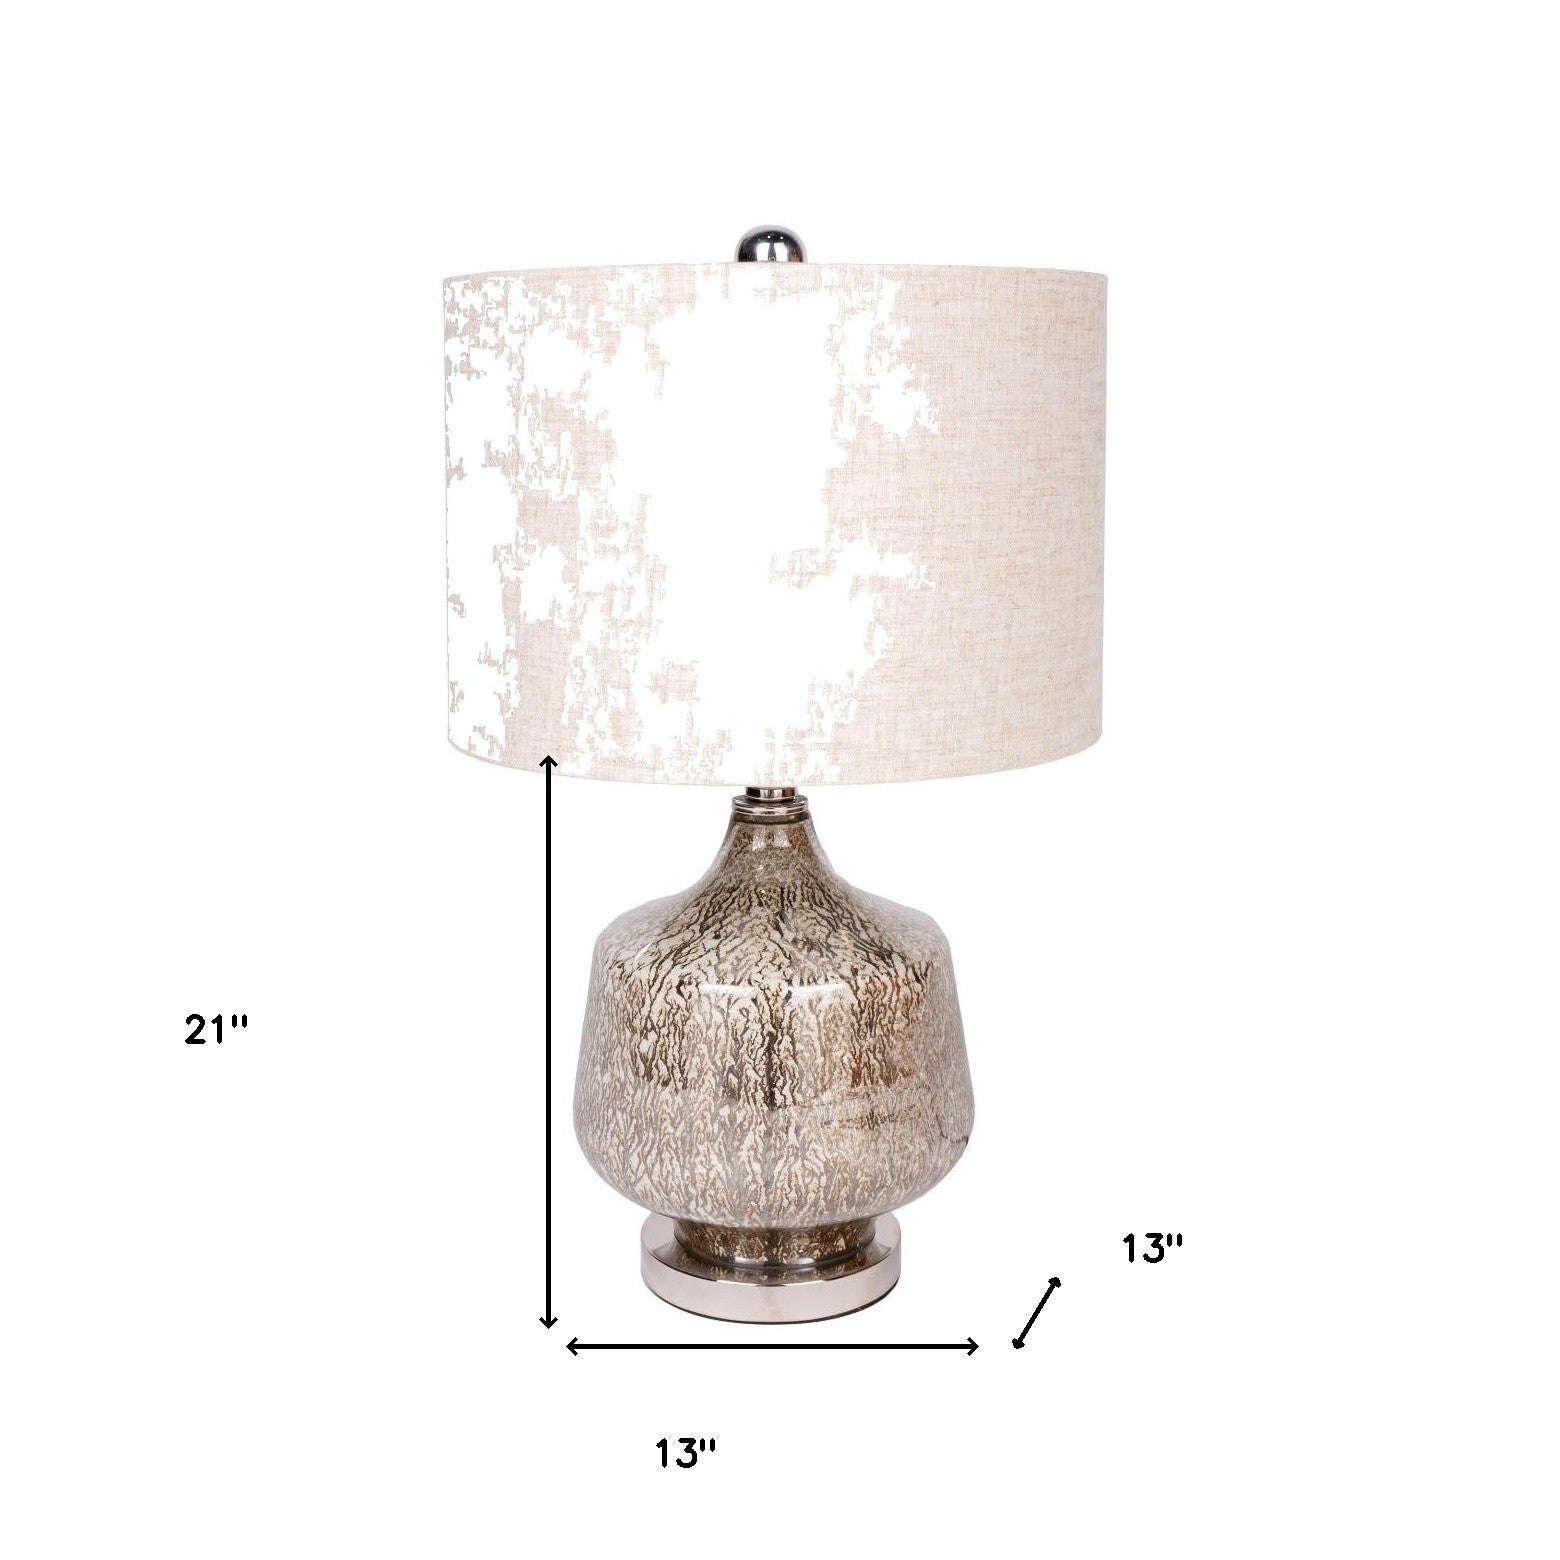 21" Silver Metallic Glass LED Table Lamp With Beige Drum Shade